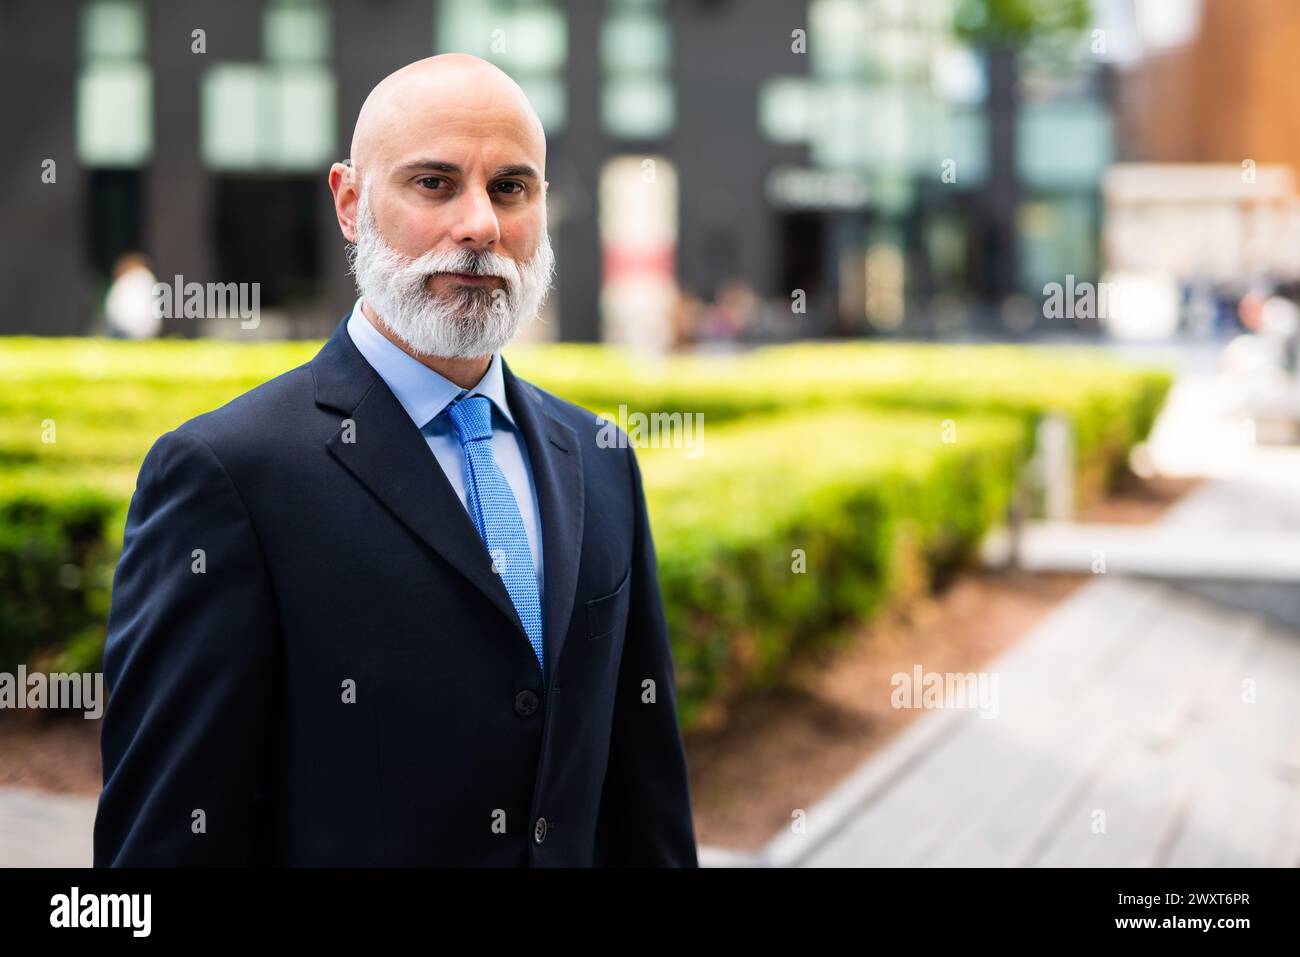 Mature bald stylish business man portrait with a white beard outdoor in a green city Stock Photo